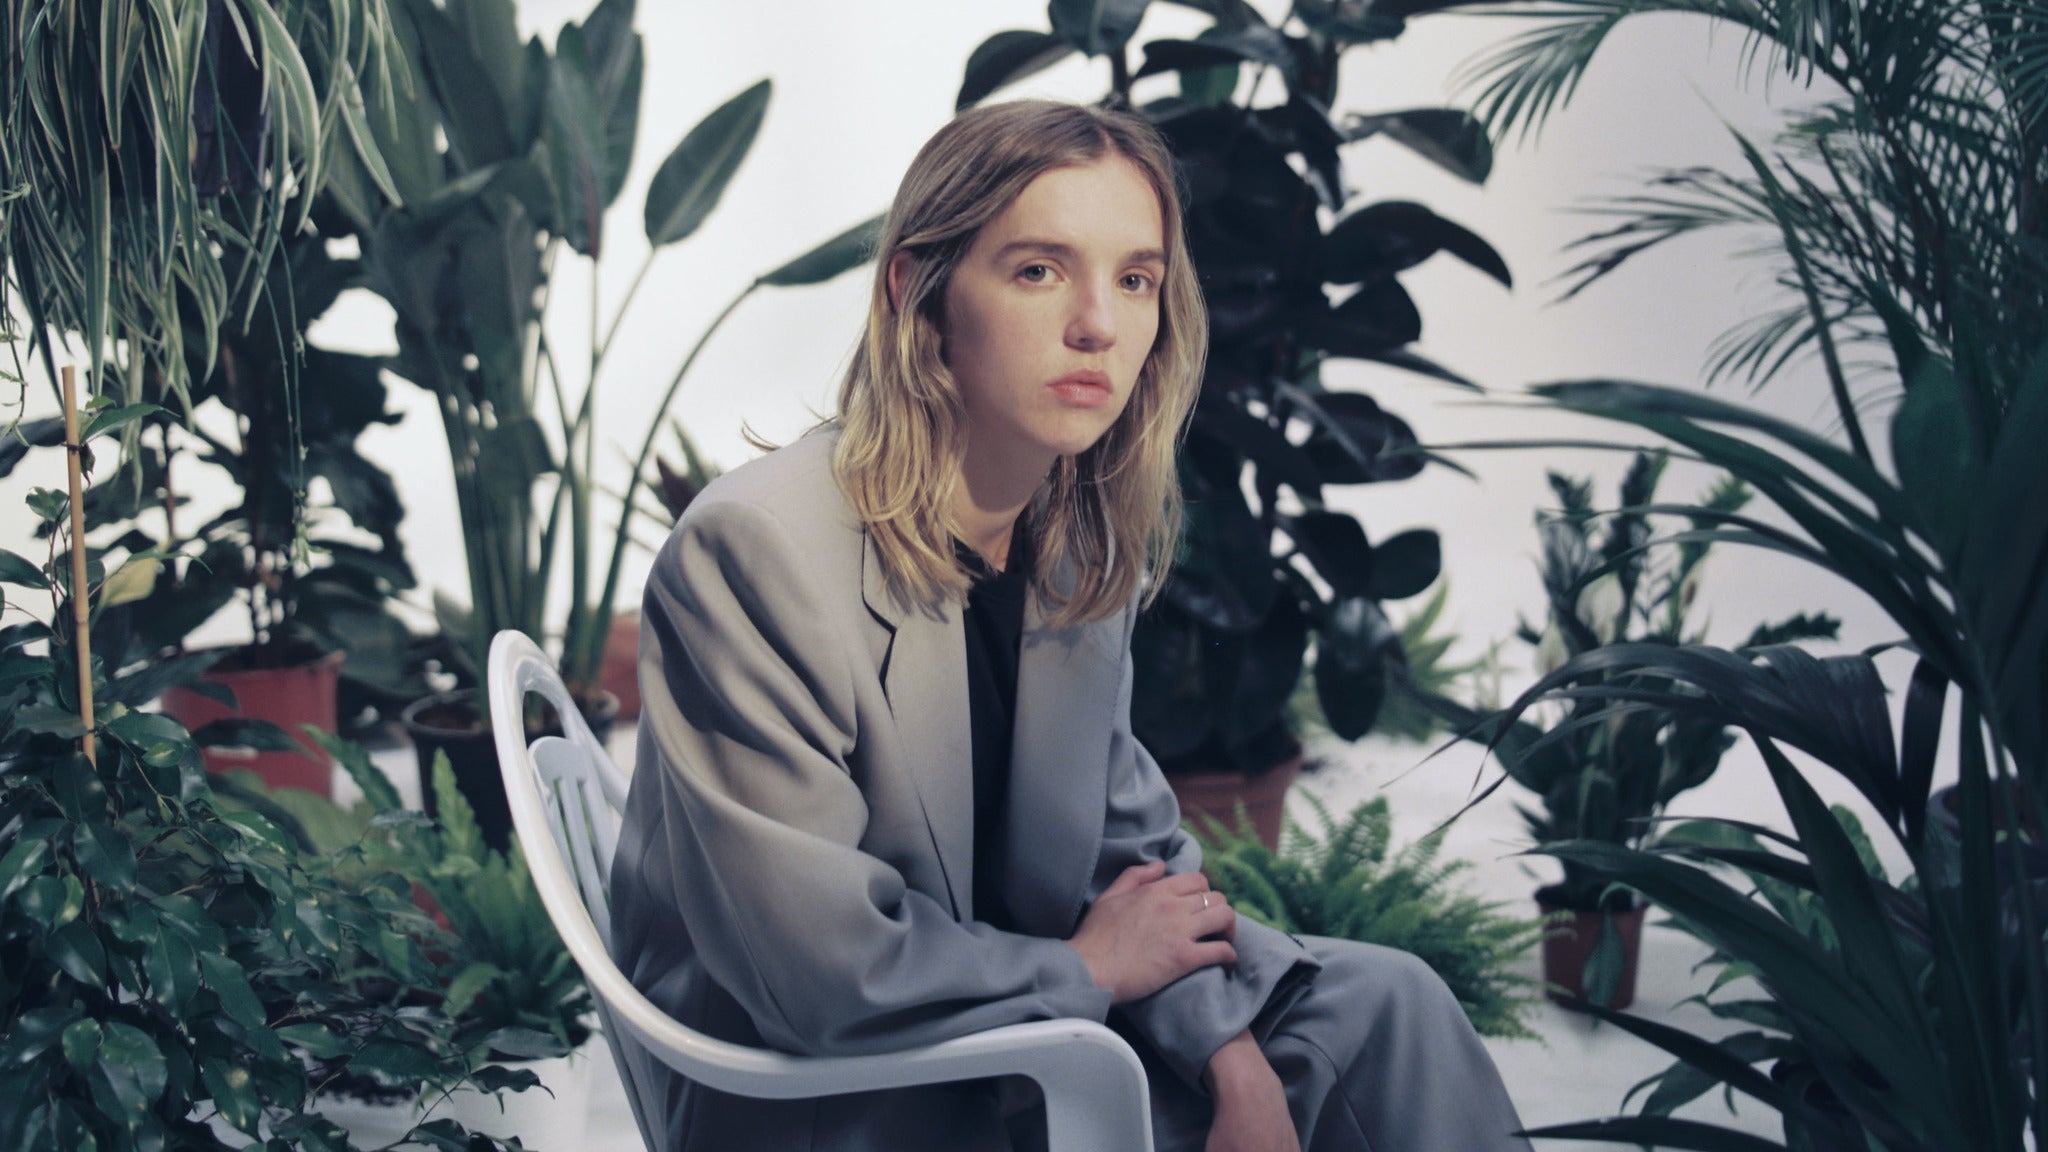 The Japanese House in Covington promo photo for Spotify presale offer code